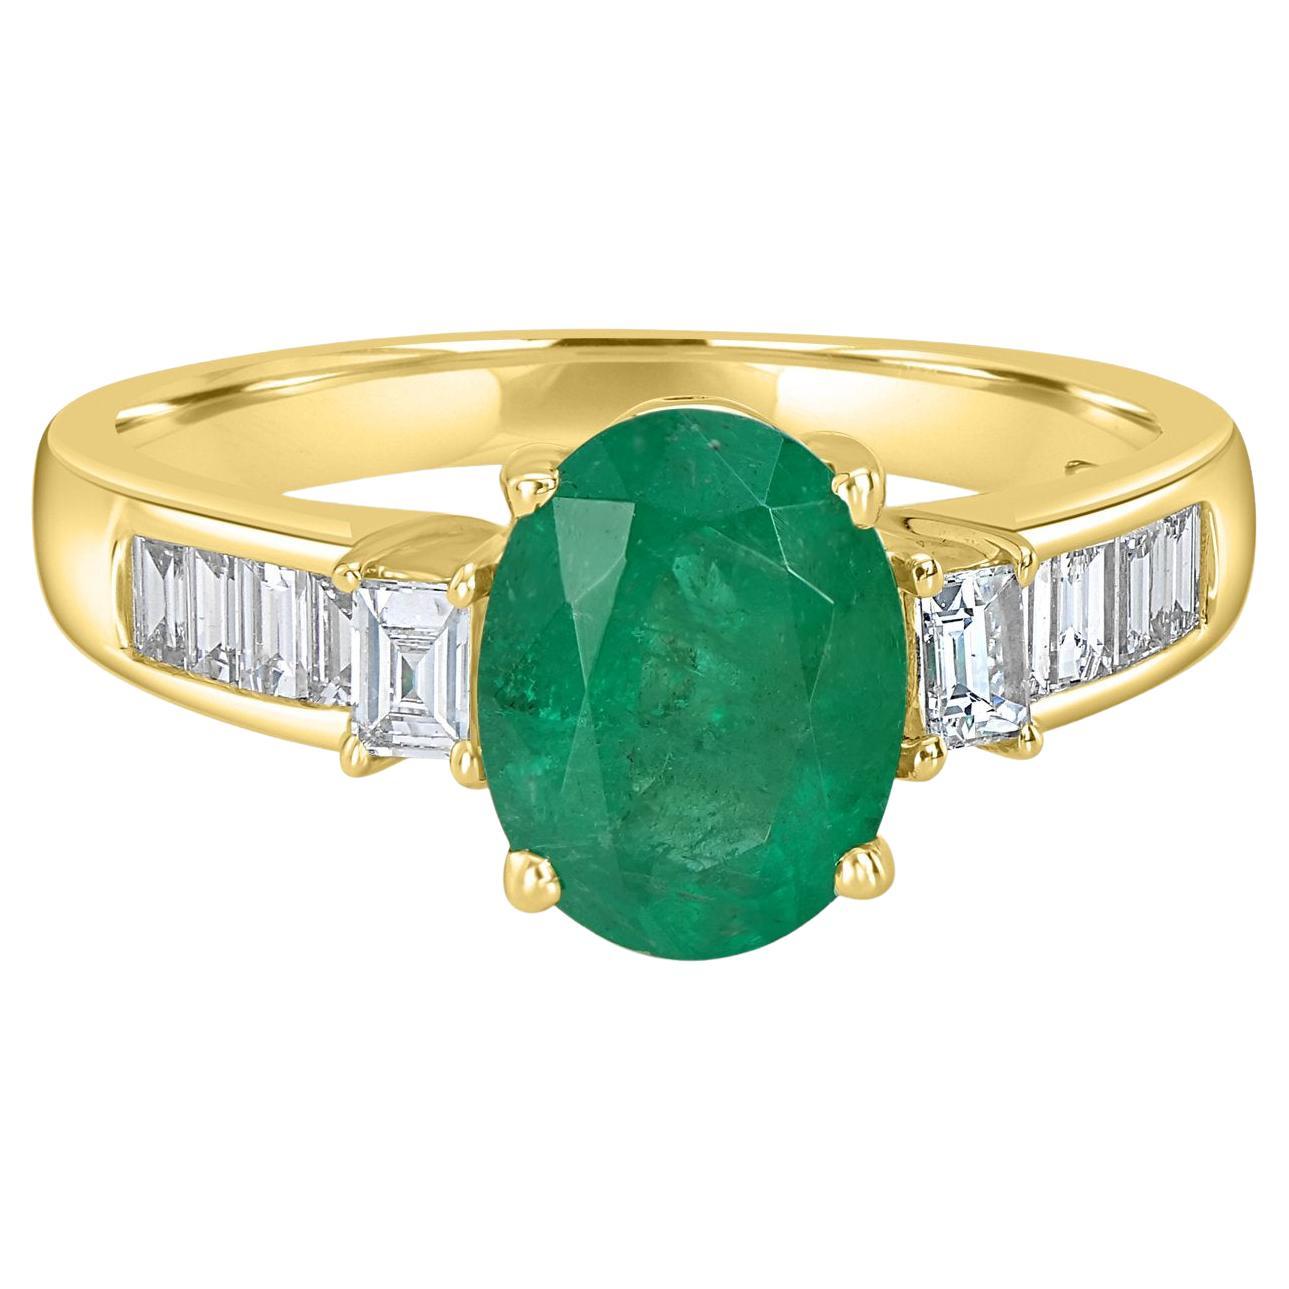 1.56ct Emerald Rings with 0.41Tct Diamond Set in 14K Yellow Gold For Sale